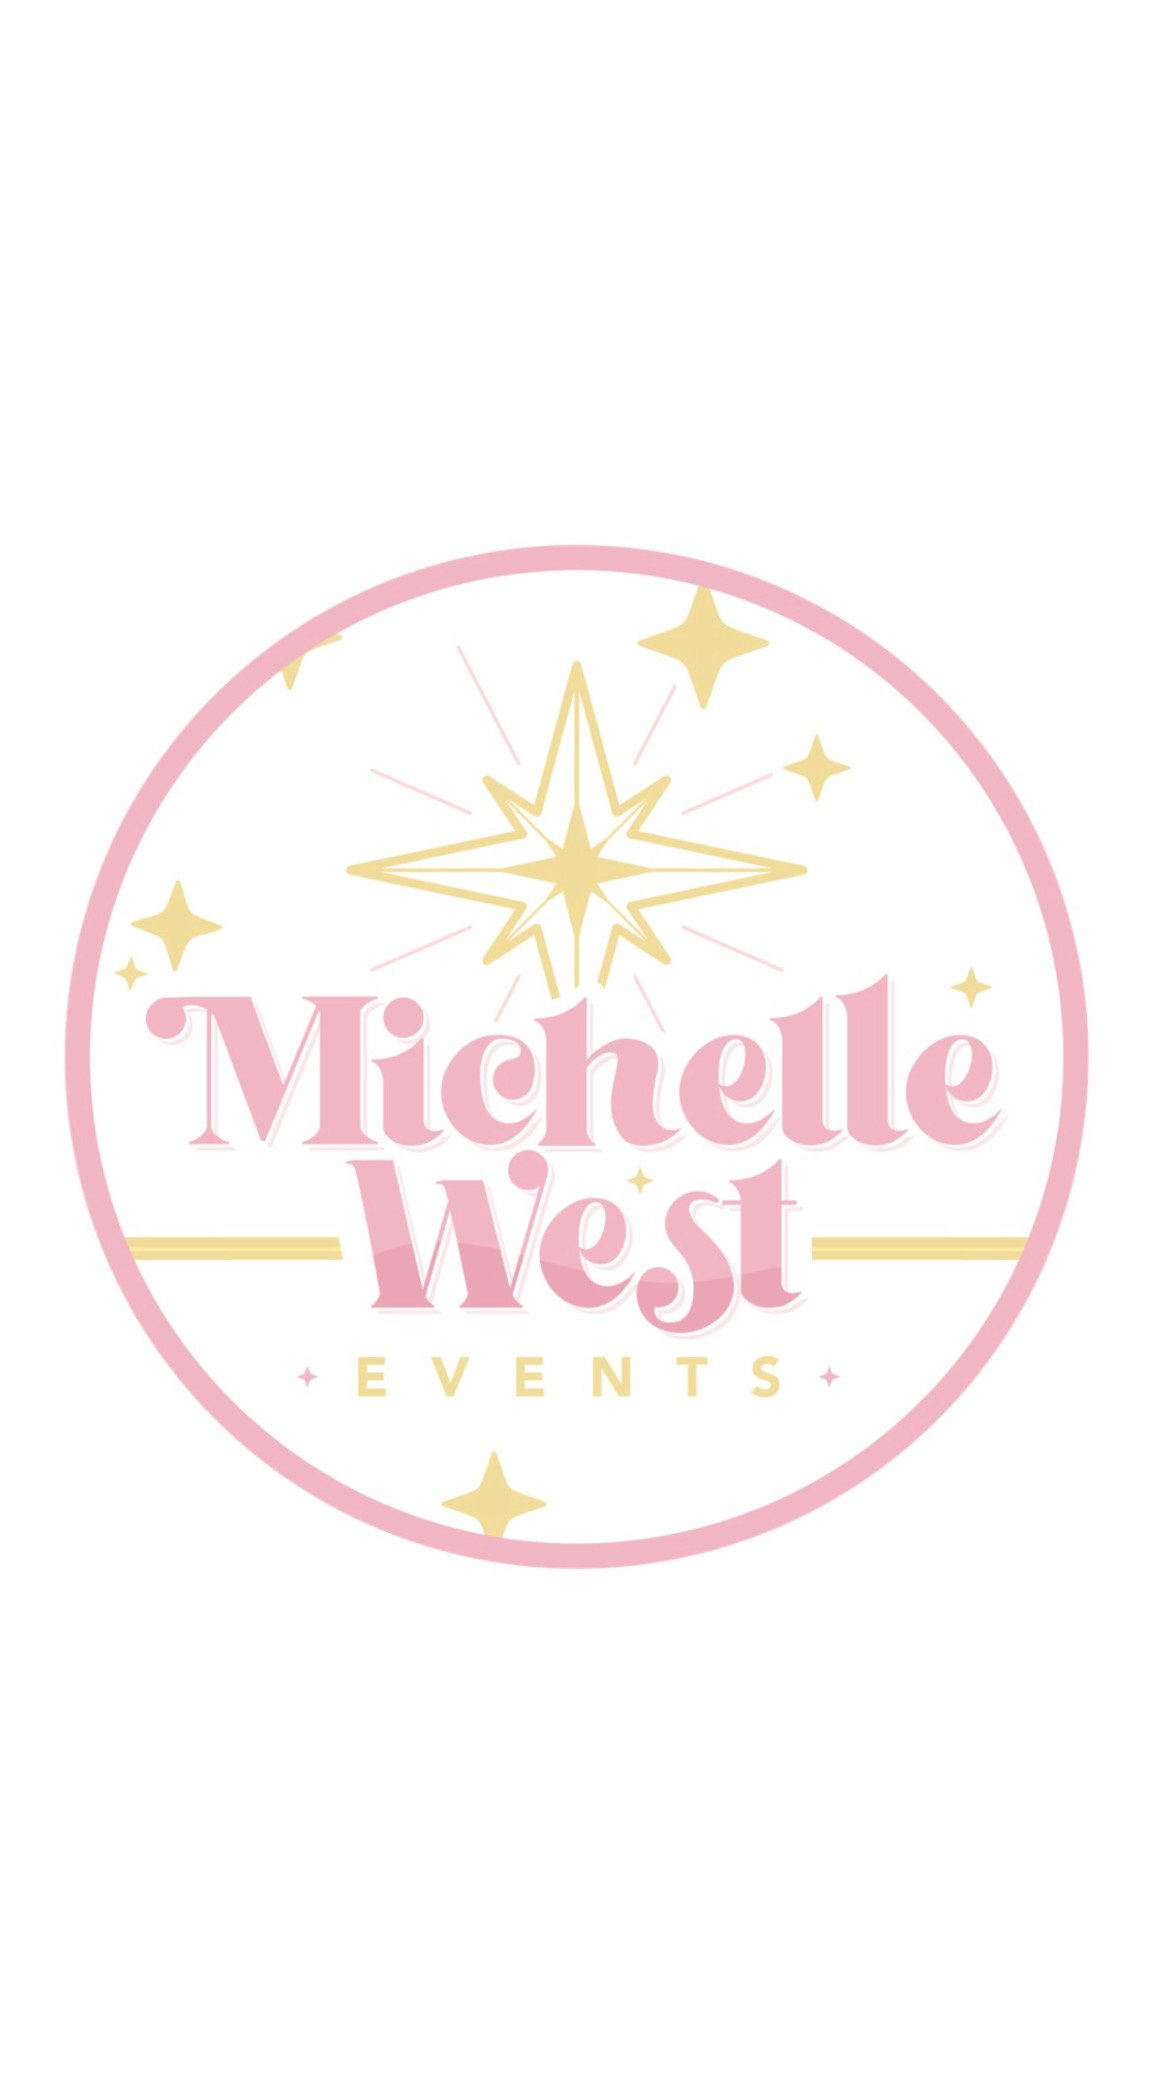 Michelle West Events